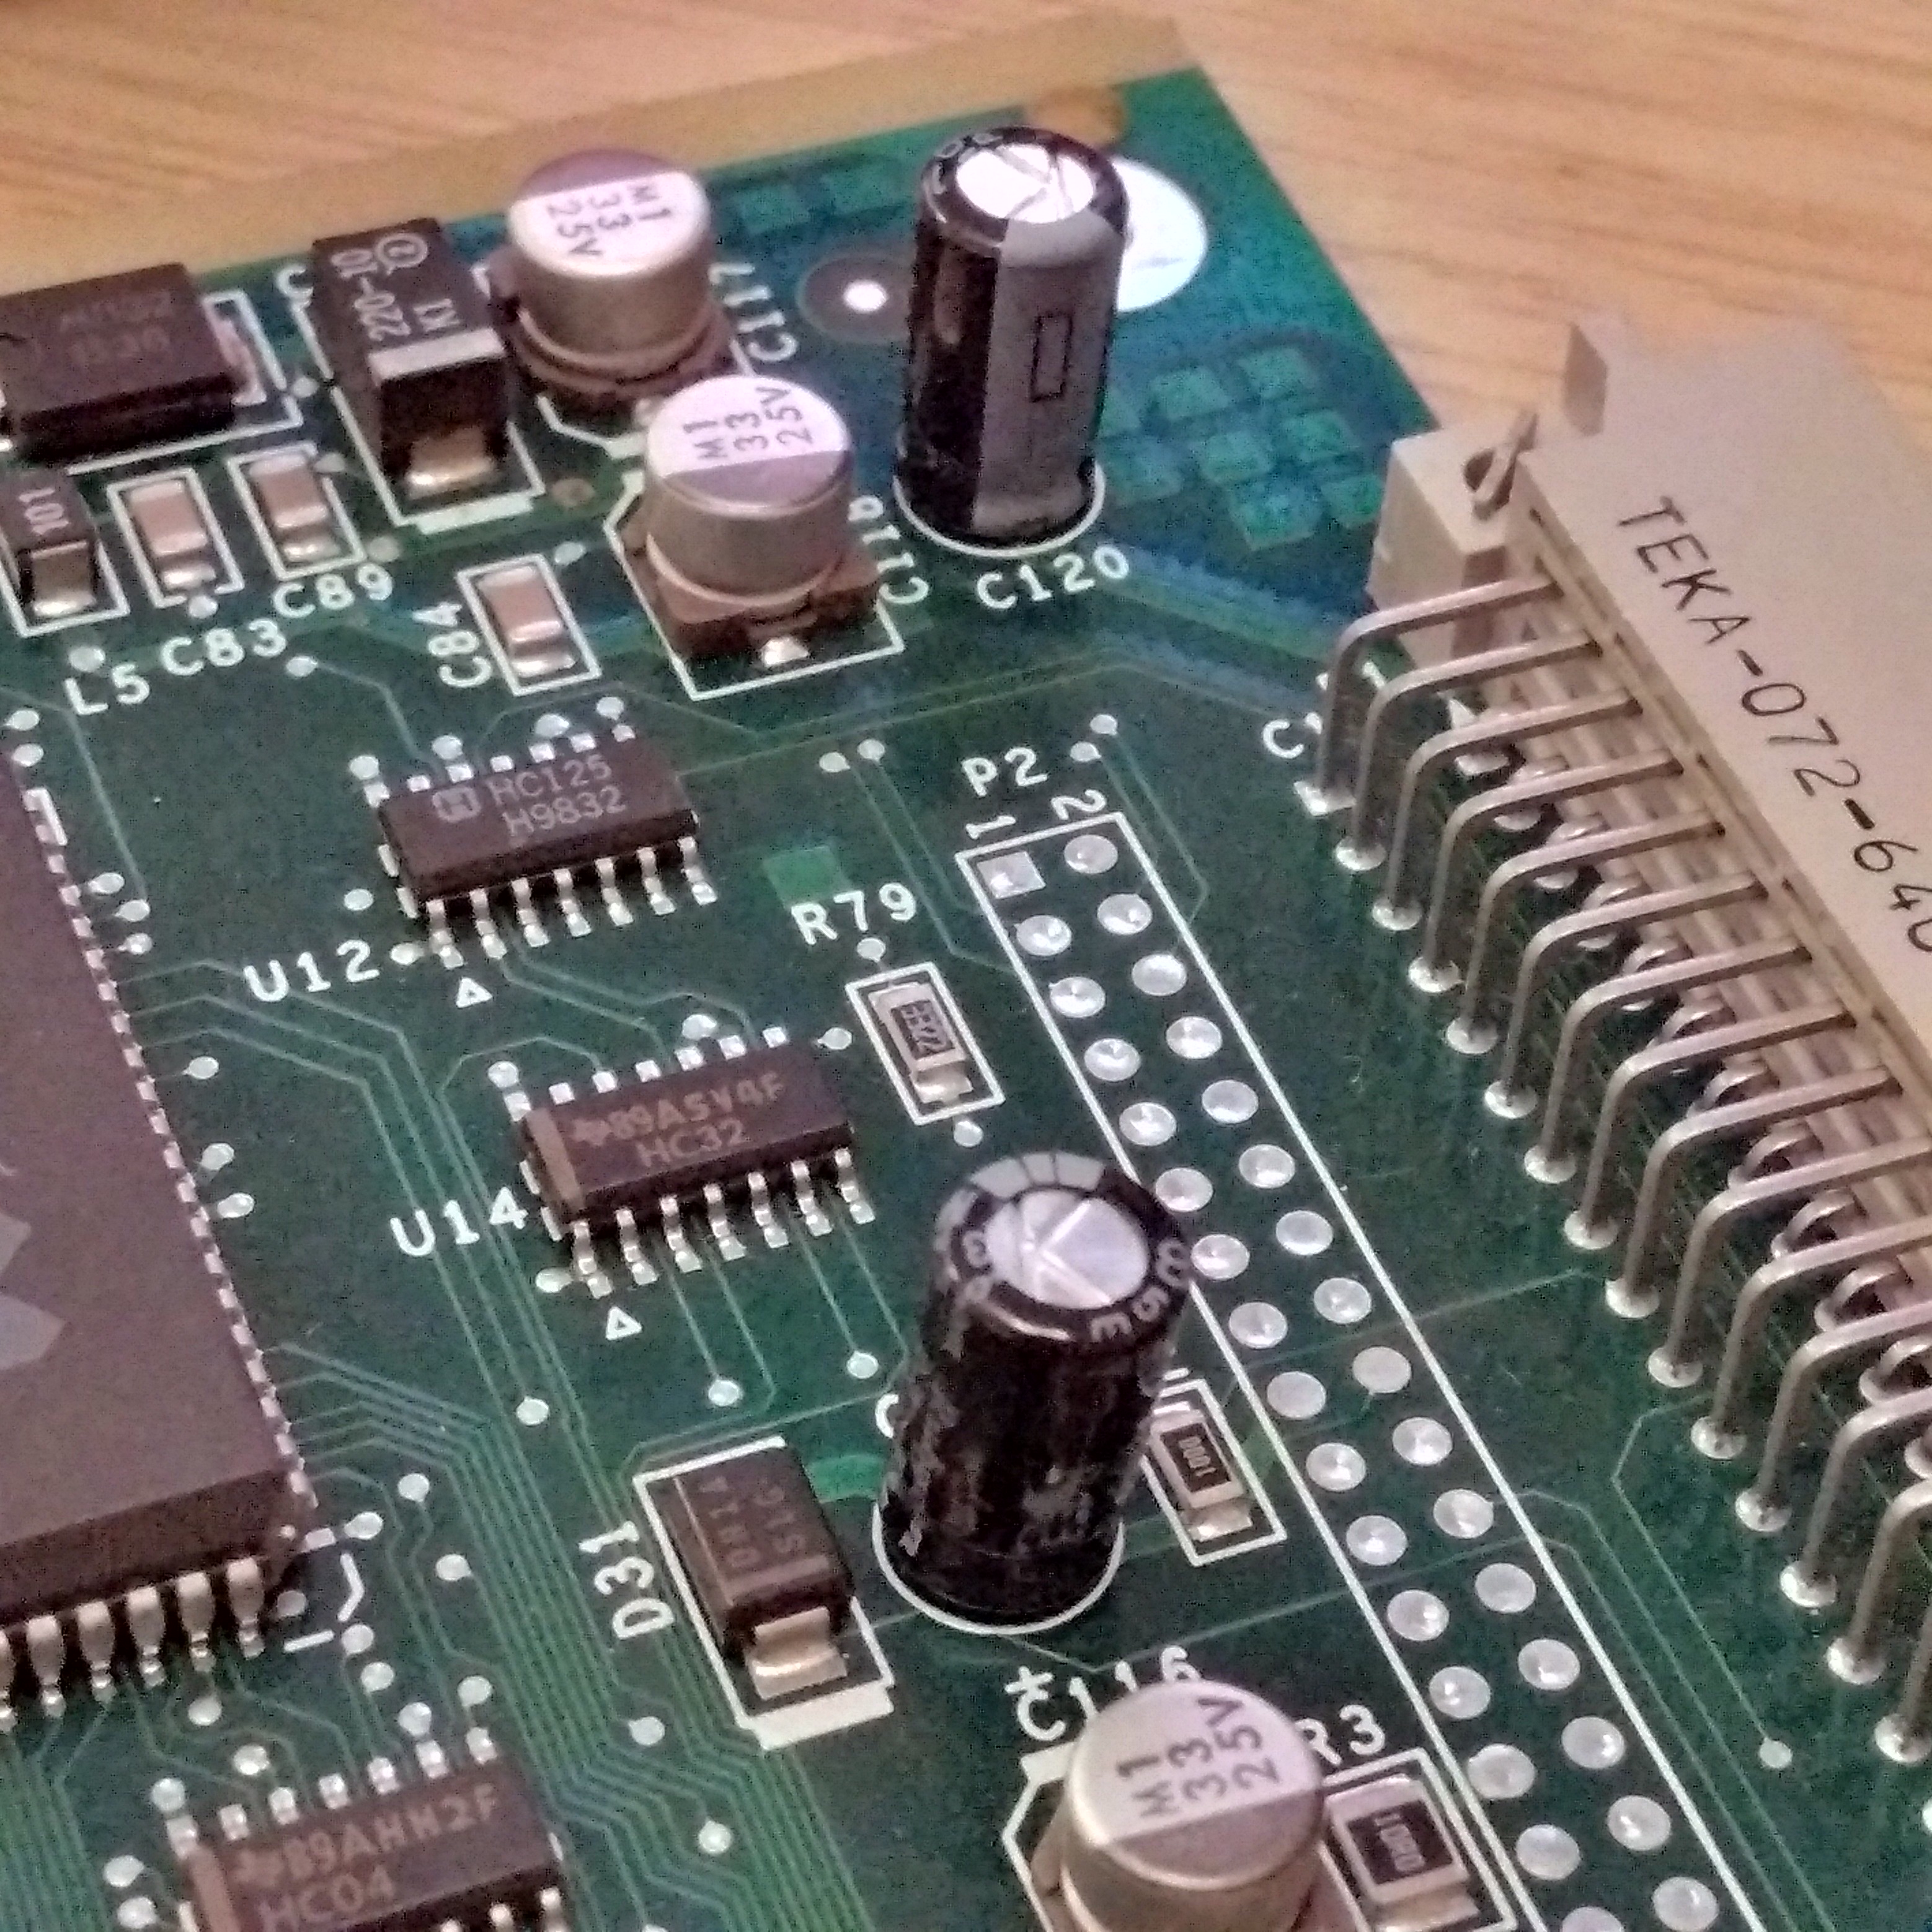 Close up of the board with the capacitors replaced